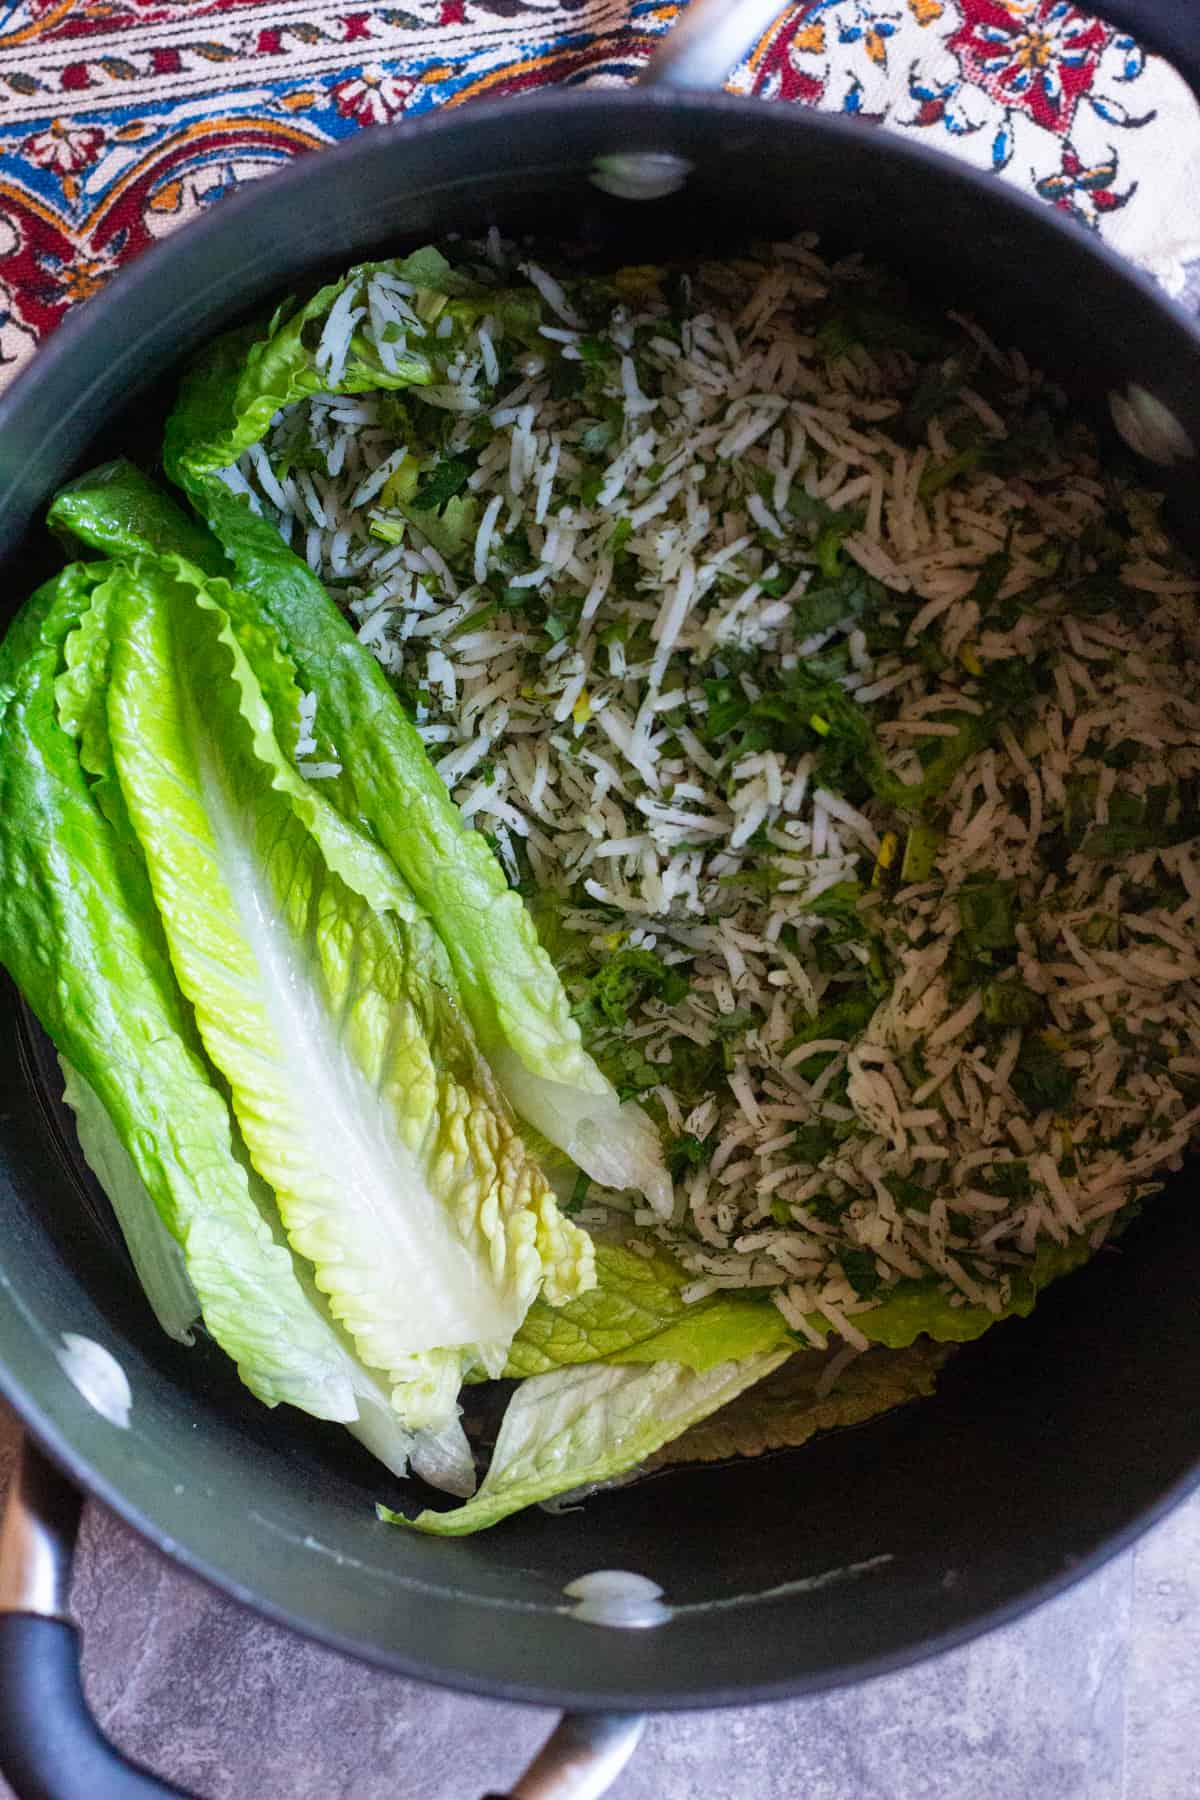 Cover the bottom of the pot with oil and lay lettuce leaves at the bottom of the pot. Scoop in the rice and herb mixture. 